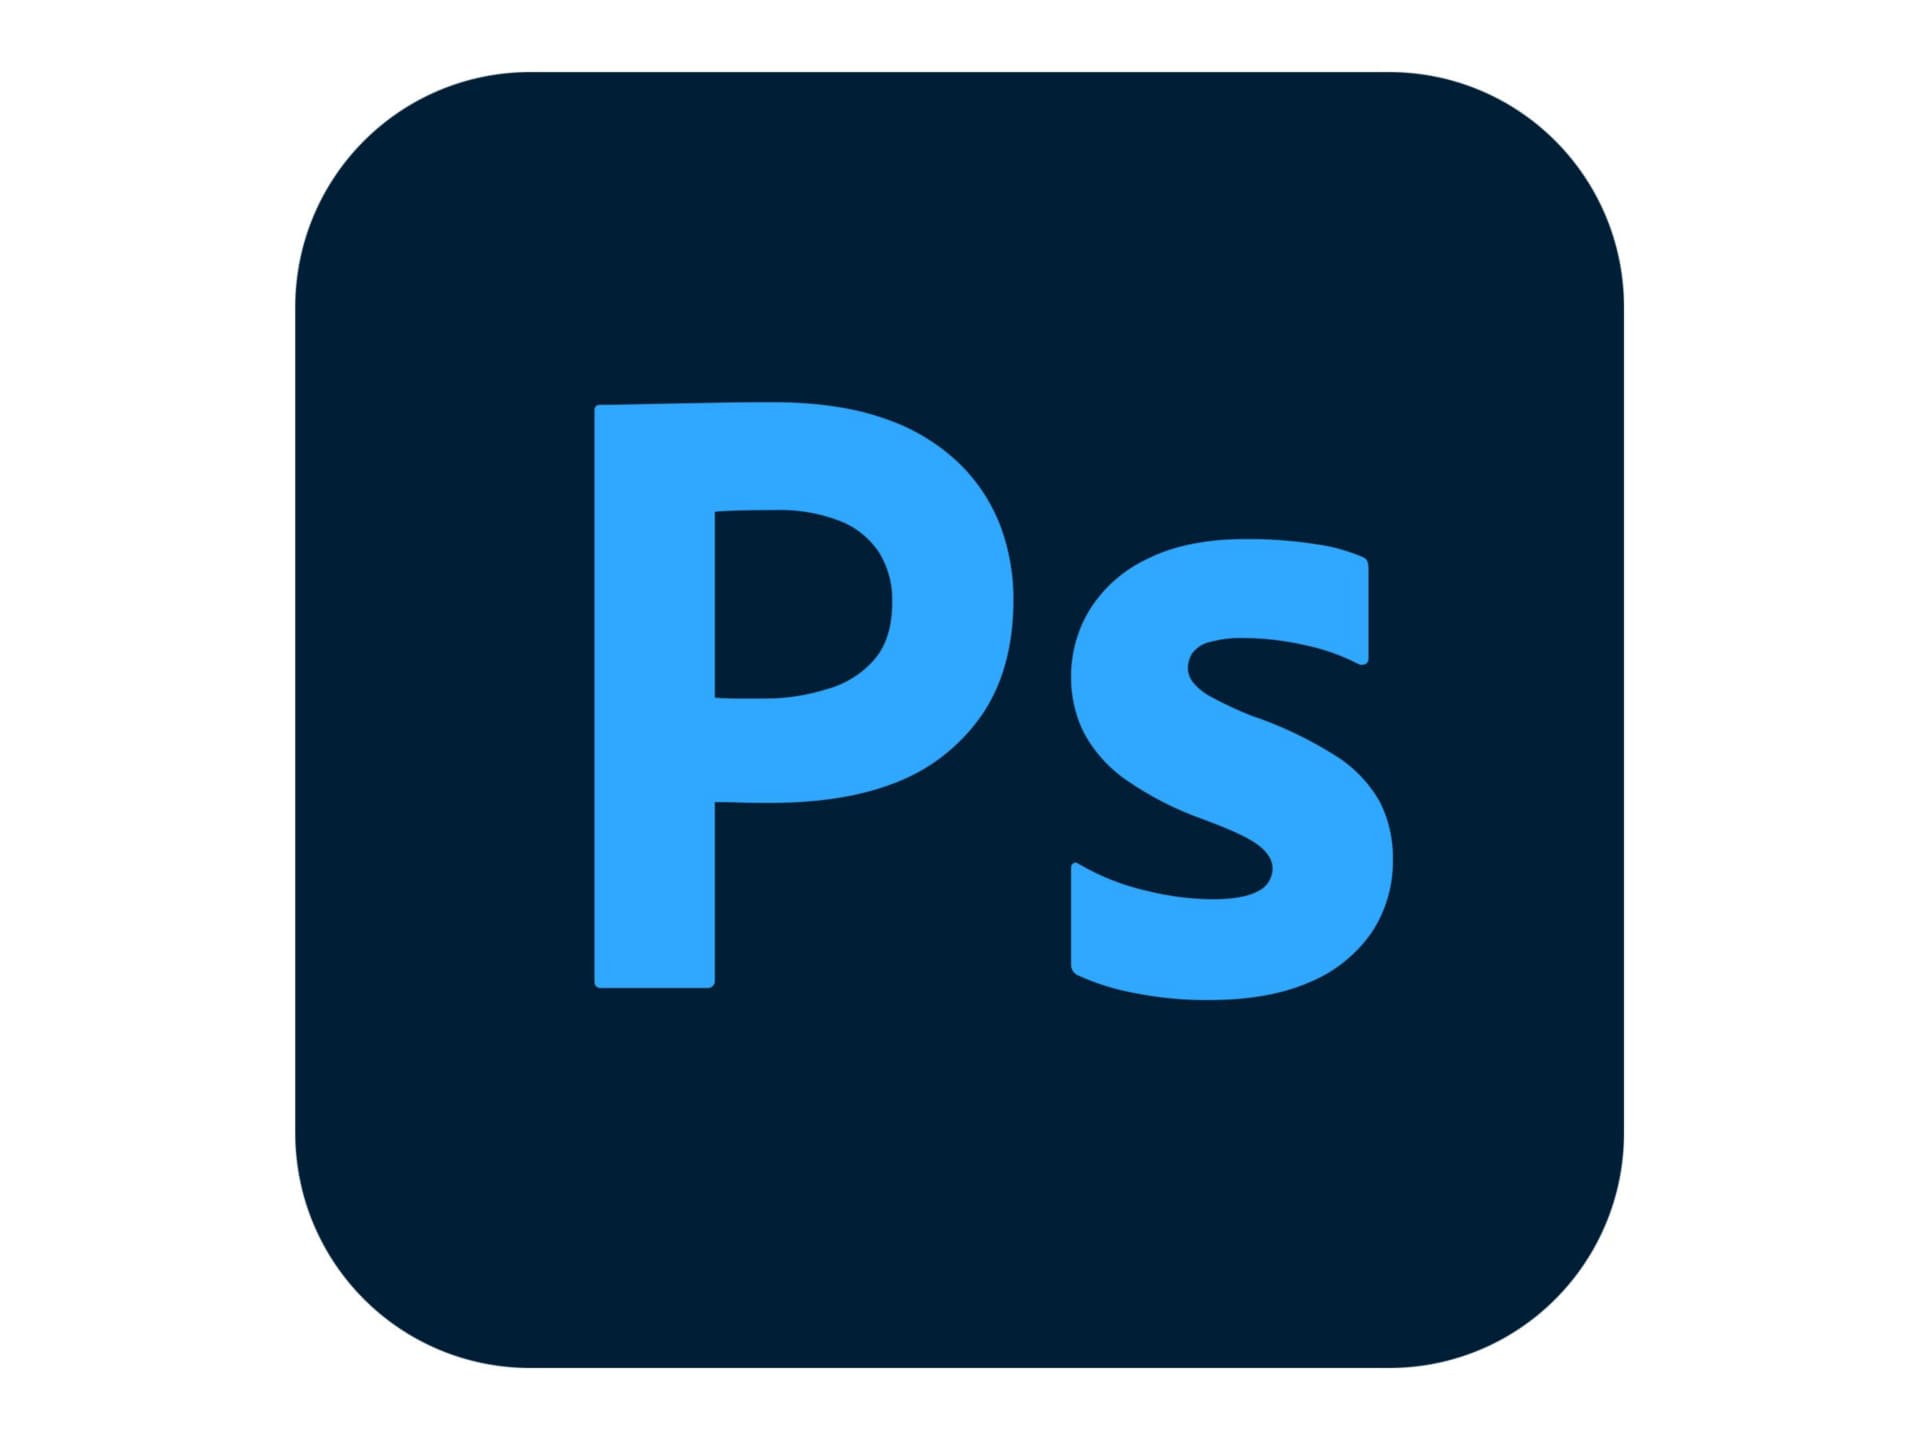 Adobe Photoshop CC for teams - Subscription New (9 months) - 1 named user